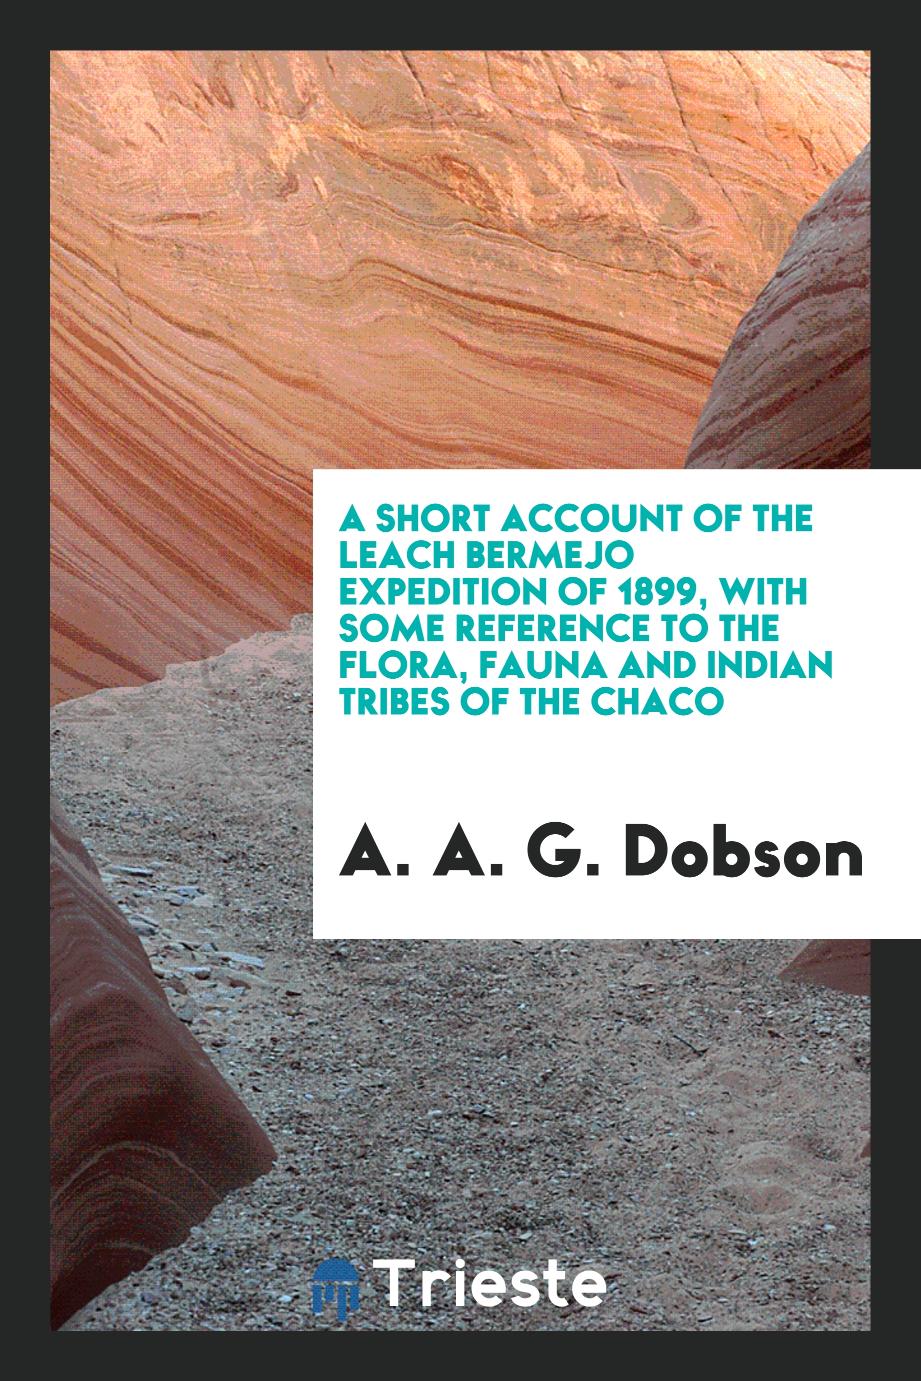 A Short Account of the Leach Bermejo Expedition of 1899, with Some Reference to the Flora, fauna and Indian tribes of the chaco